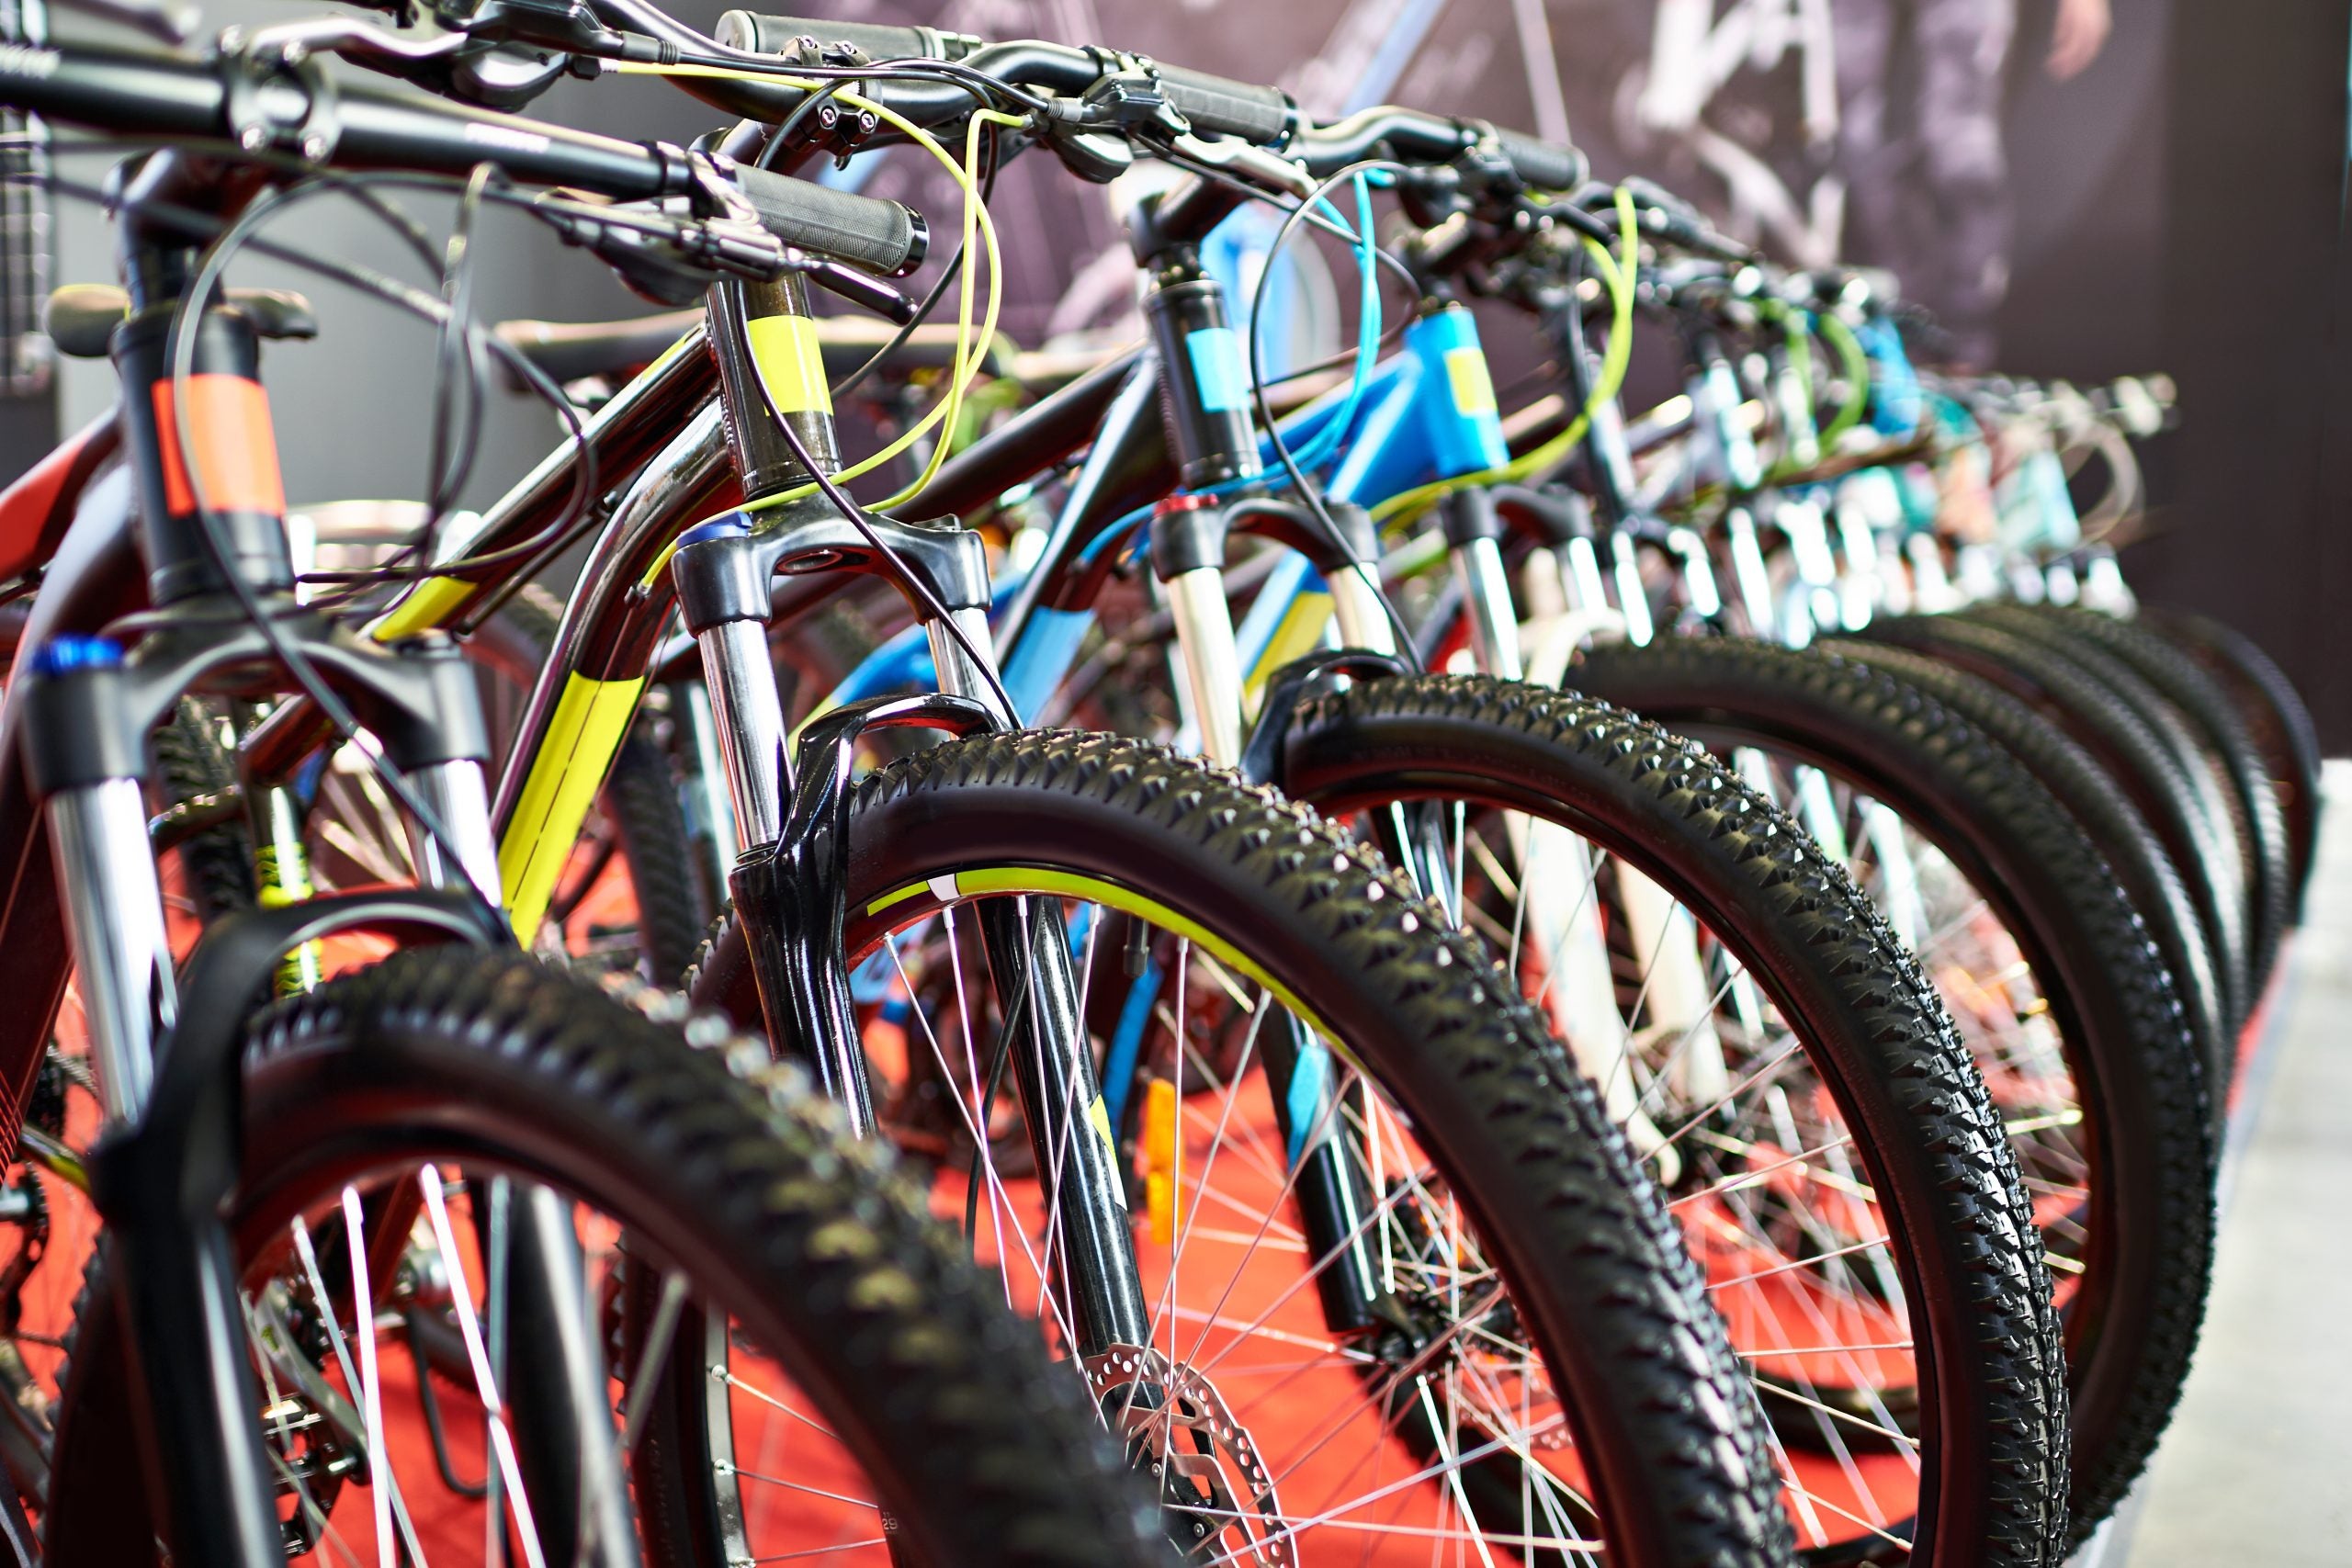 There are many different types of bicycles. This is our guide to help you find the right bike for your needs.